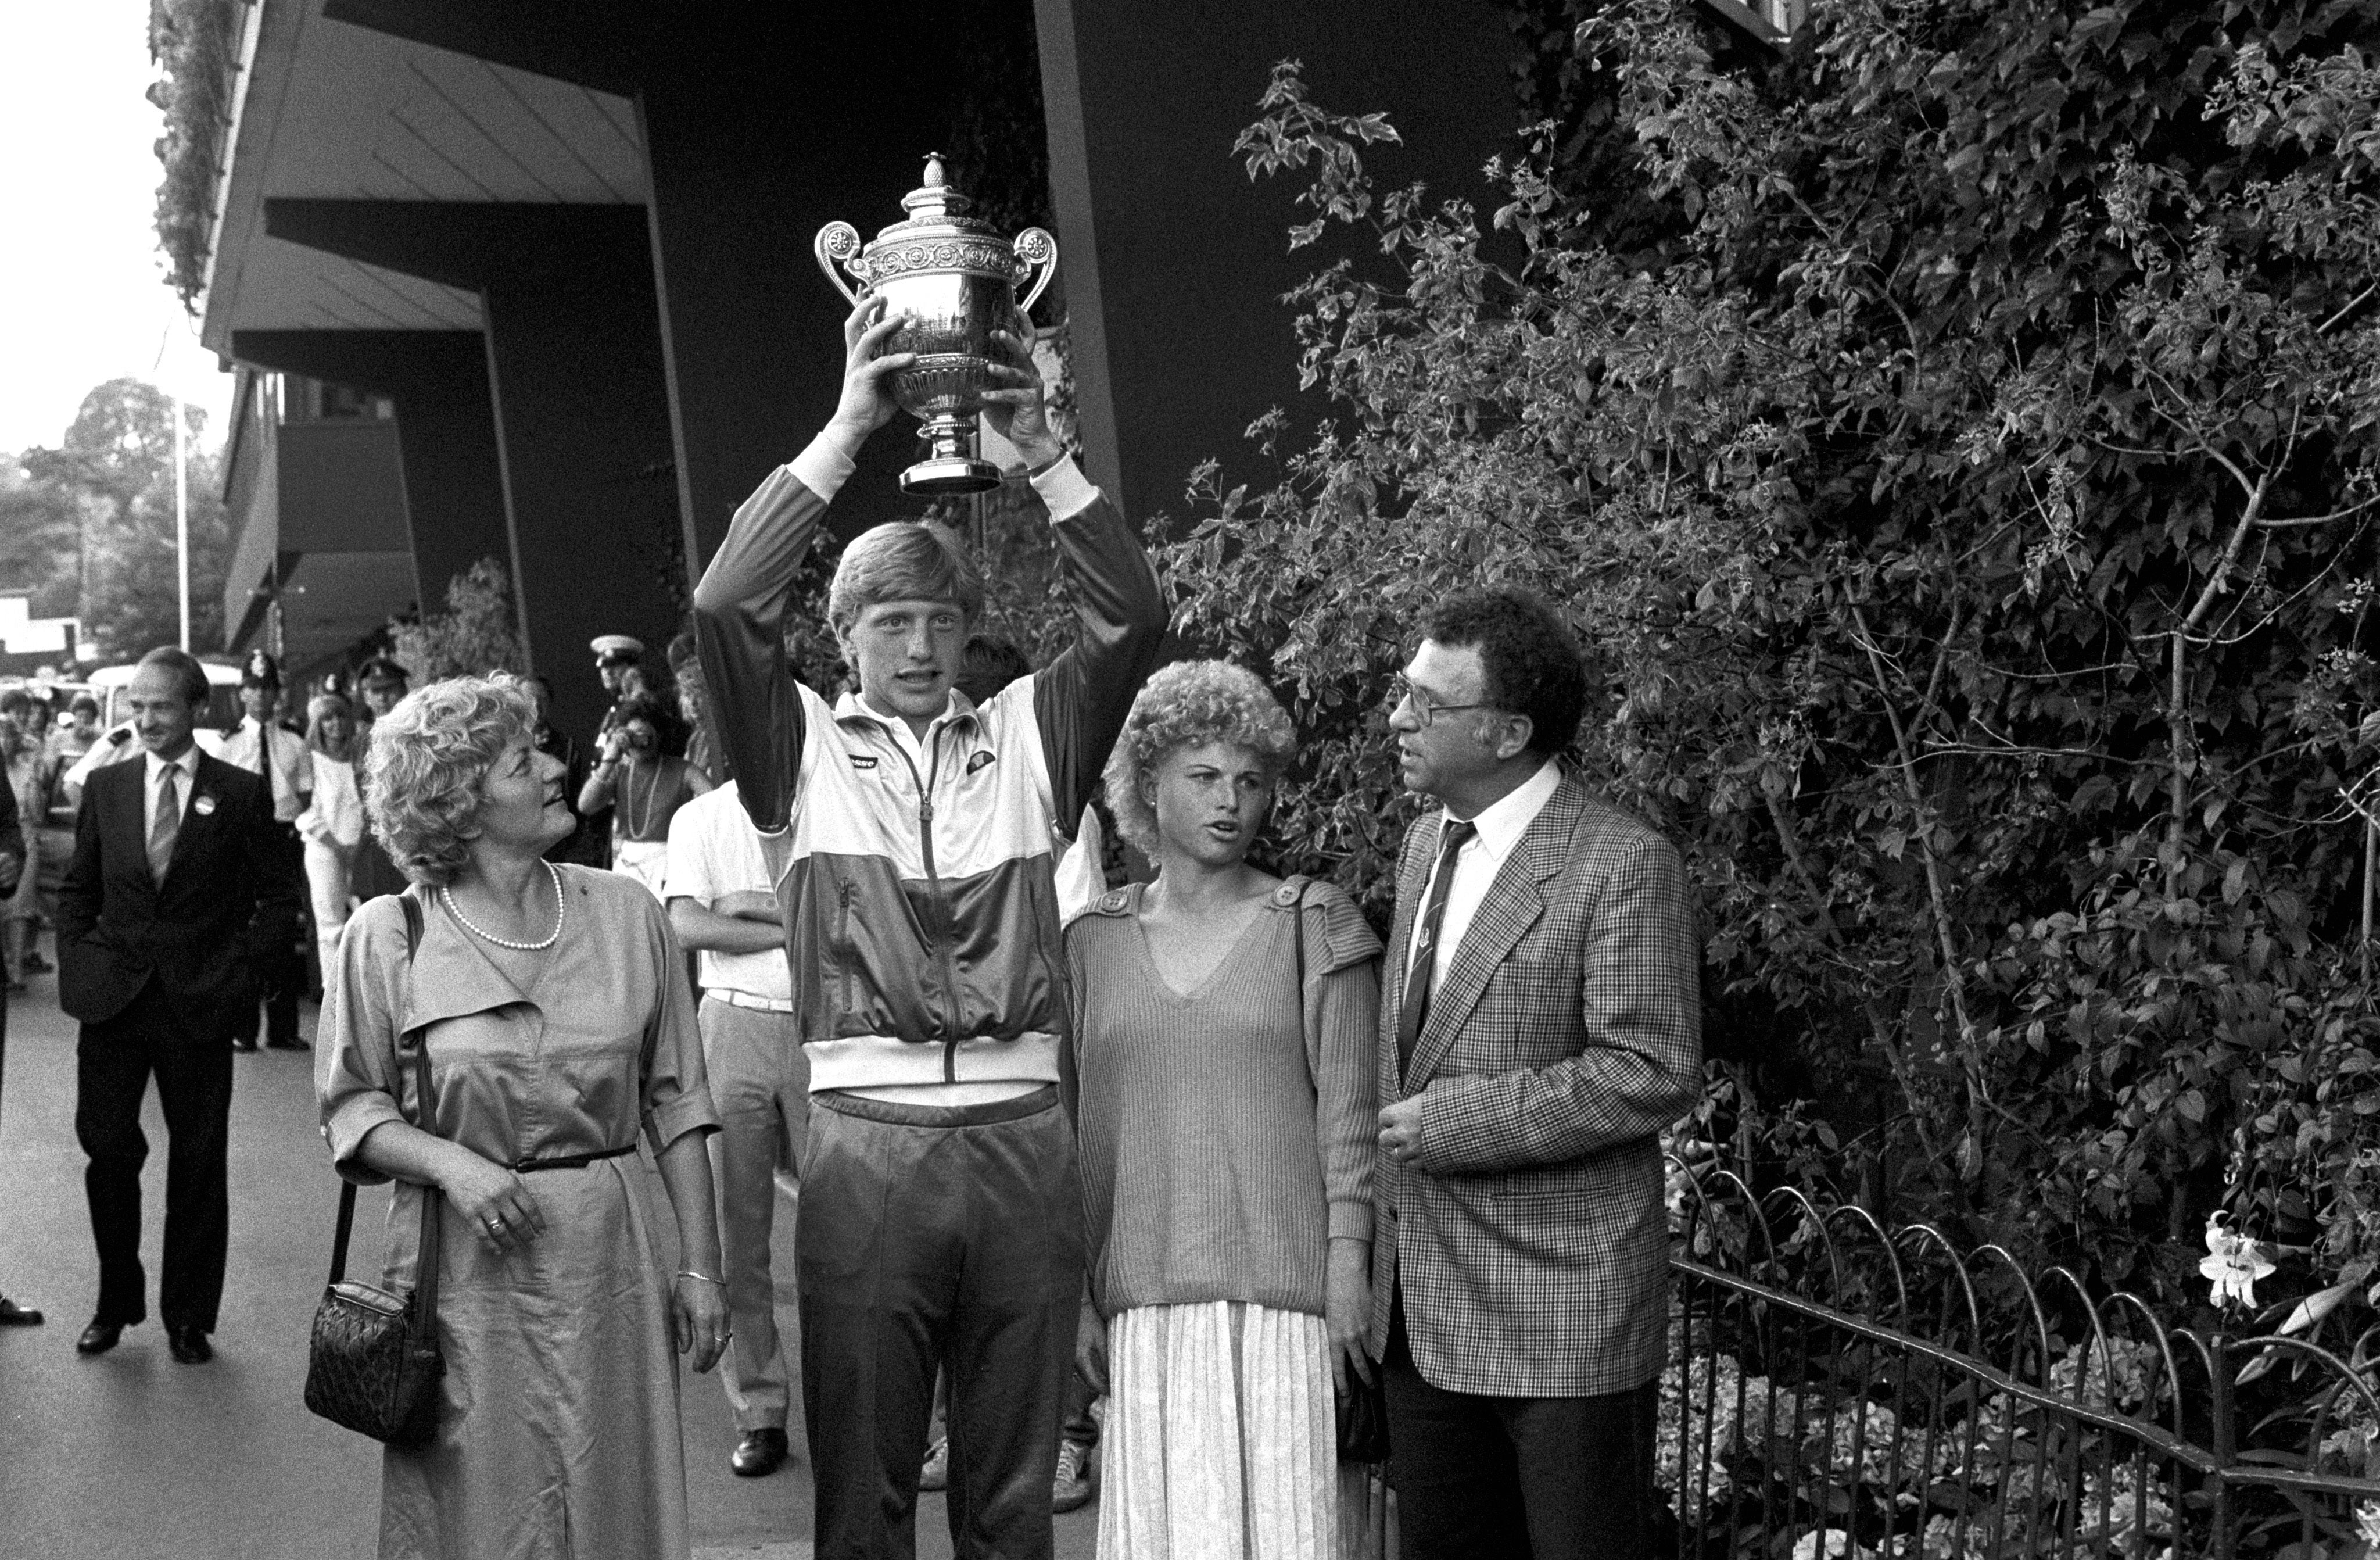 The Wimbledon men’s singles champion, Boris Becker, with his family after winning the title (Archive/PA)